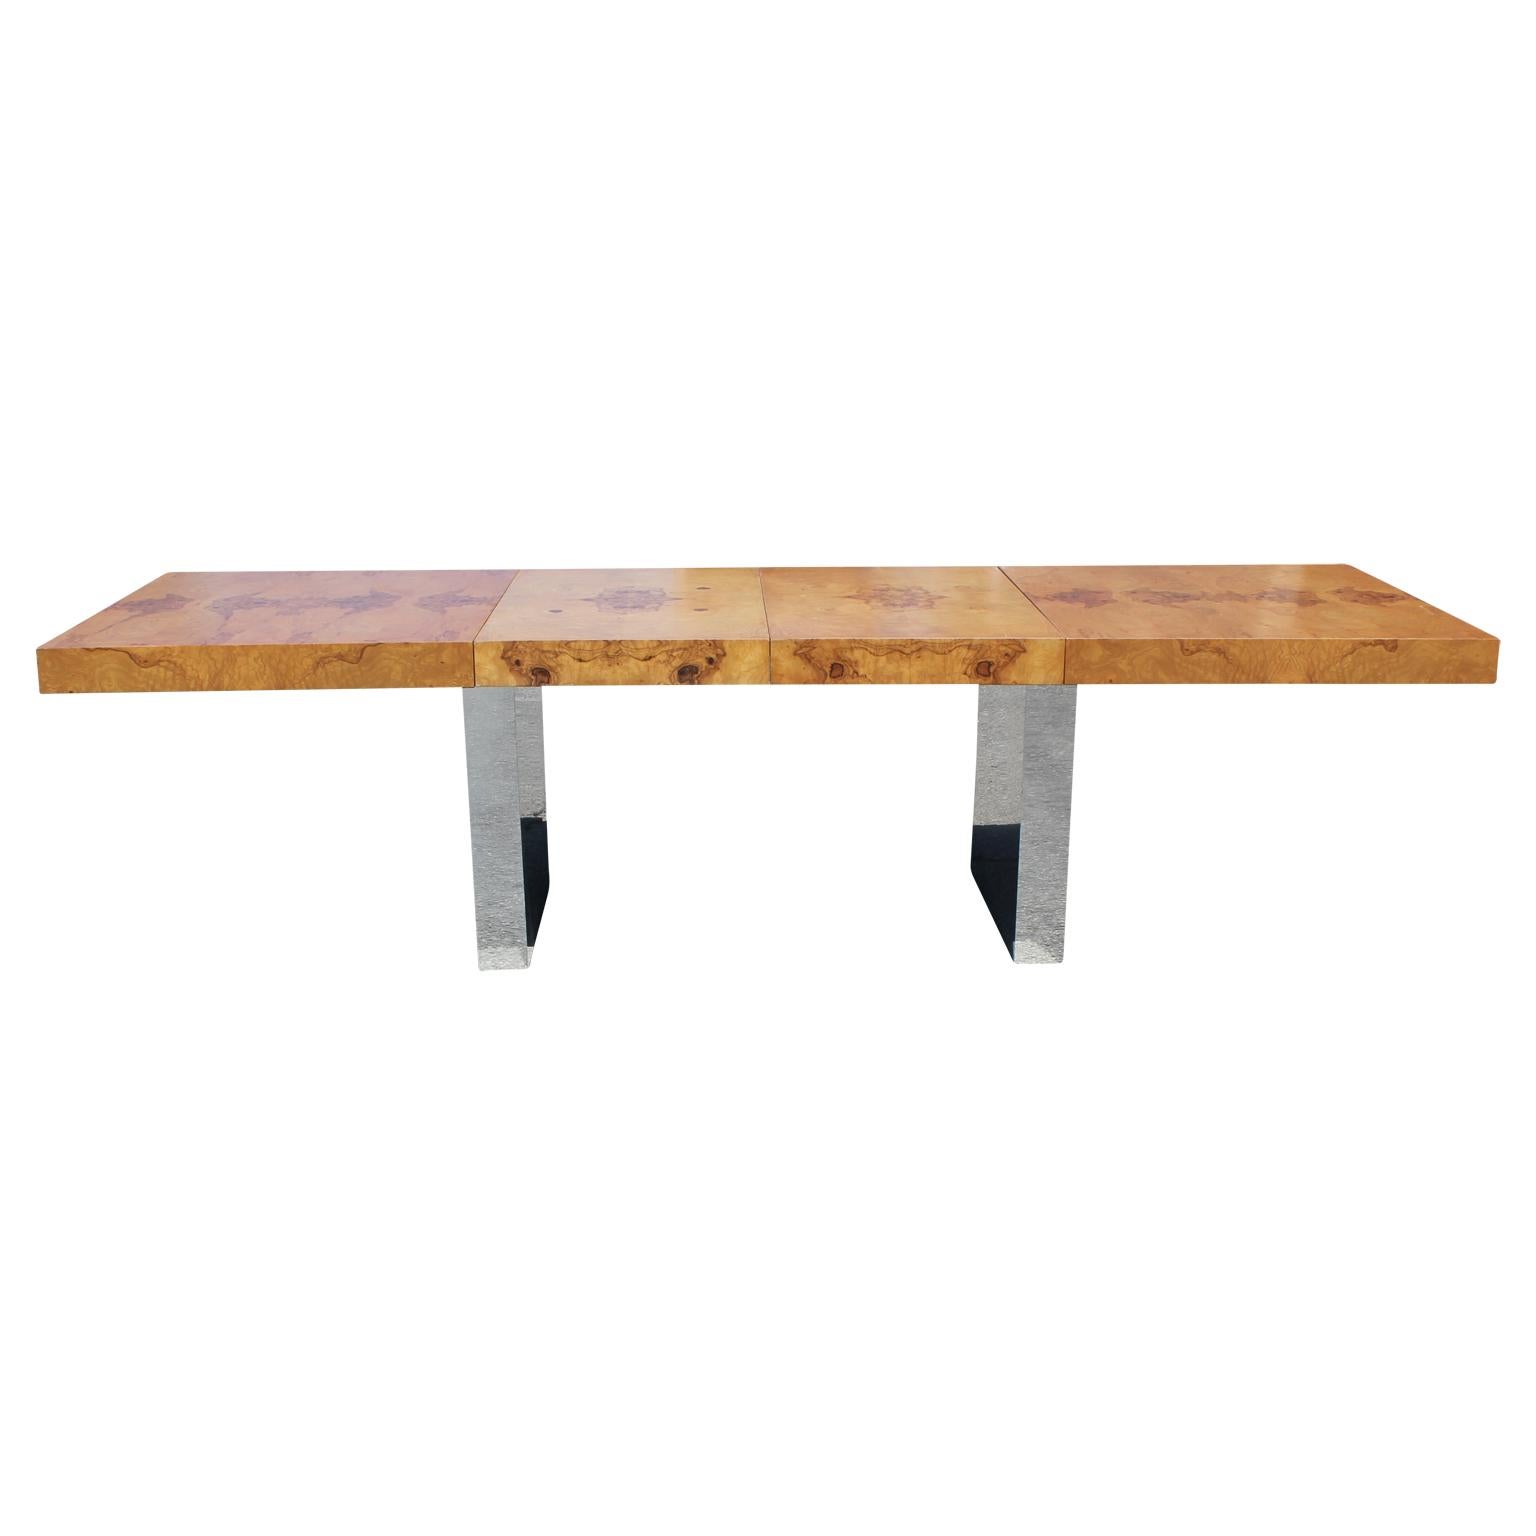 American Expandable Chrome and Burl Wood Dining Table by Milo Baughman for Thayer Coggin